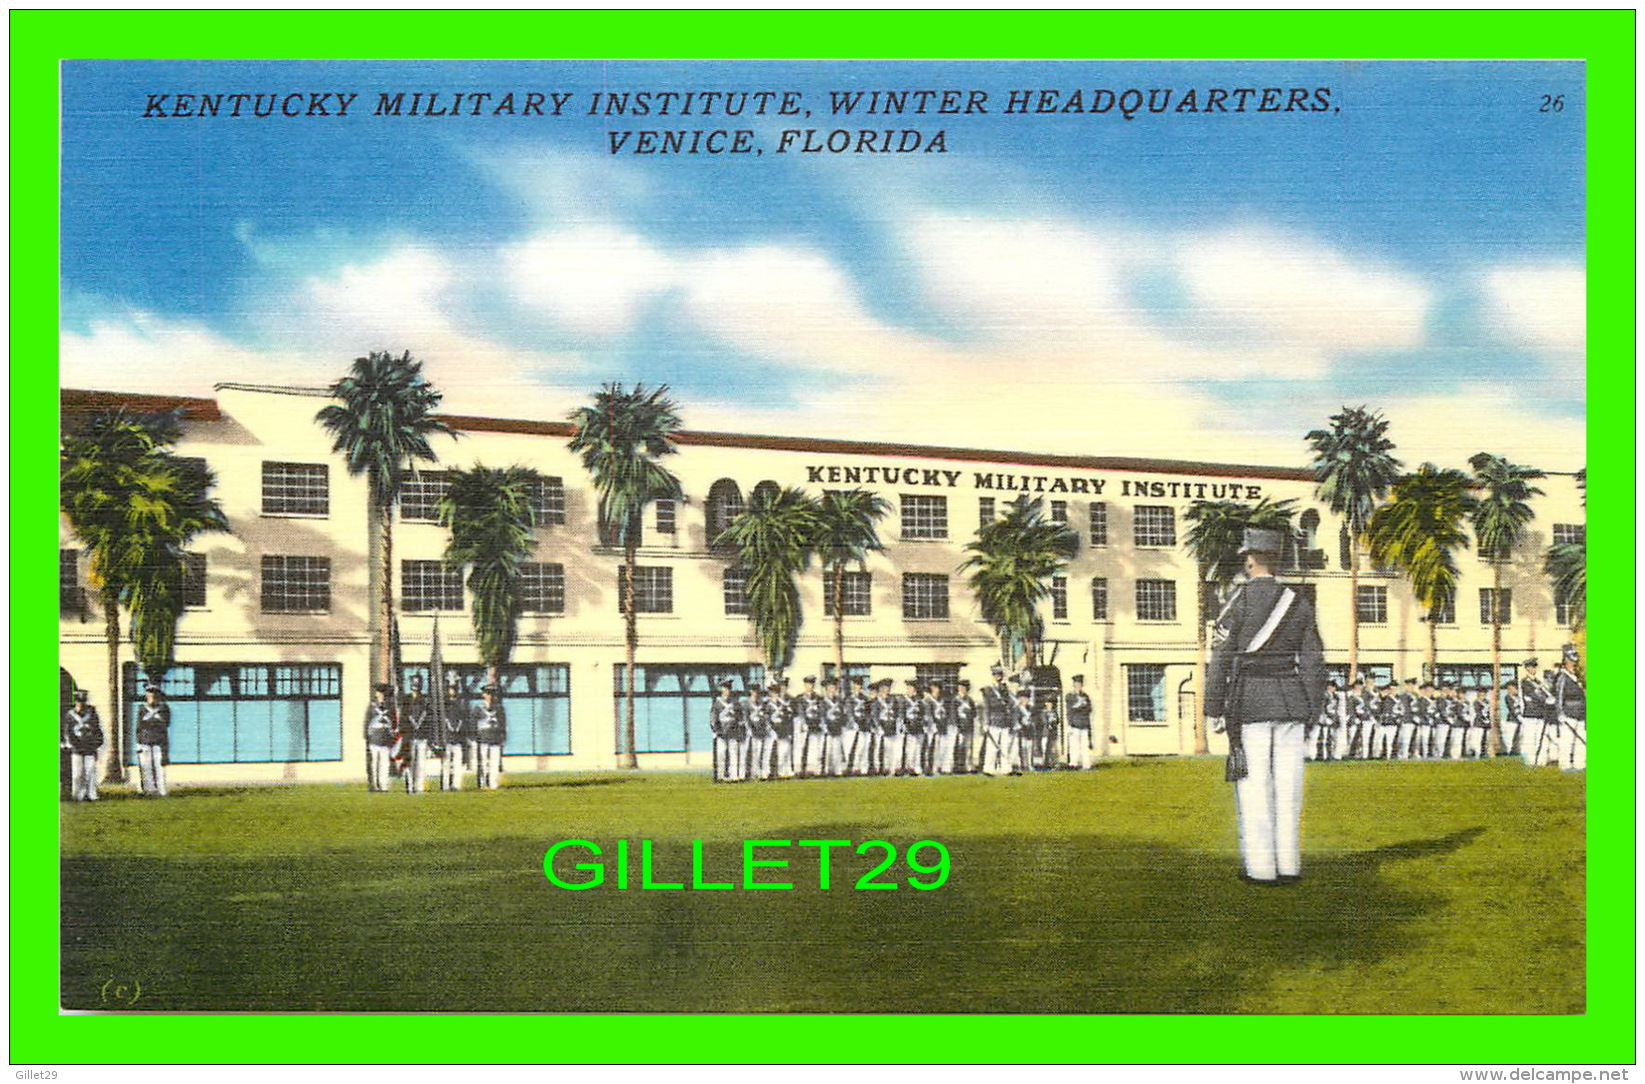 VENICE, FL - LENTUCKY MILITARY INSTITUTE WINTER HEADQUARTERS - ANIMATED - PUB. BY TROPICAL CARDS &amp; SOUVENIRS - - Venice